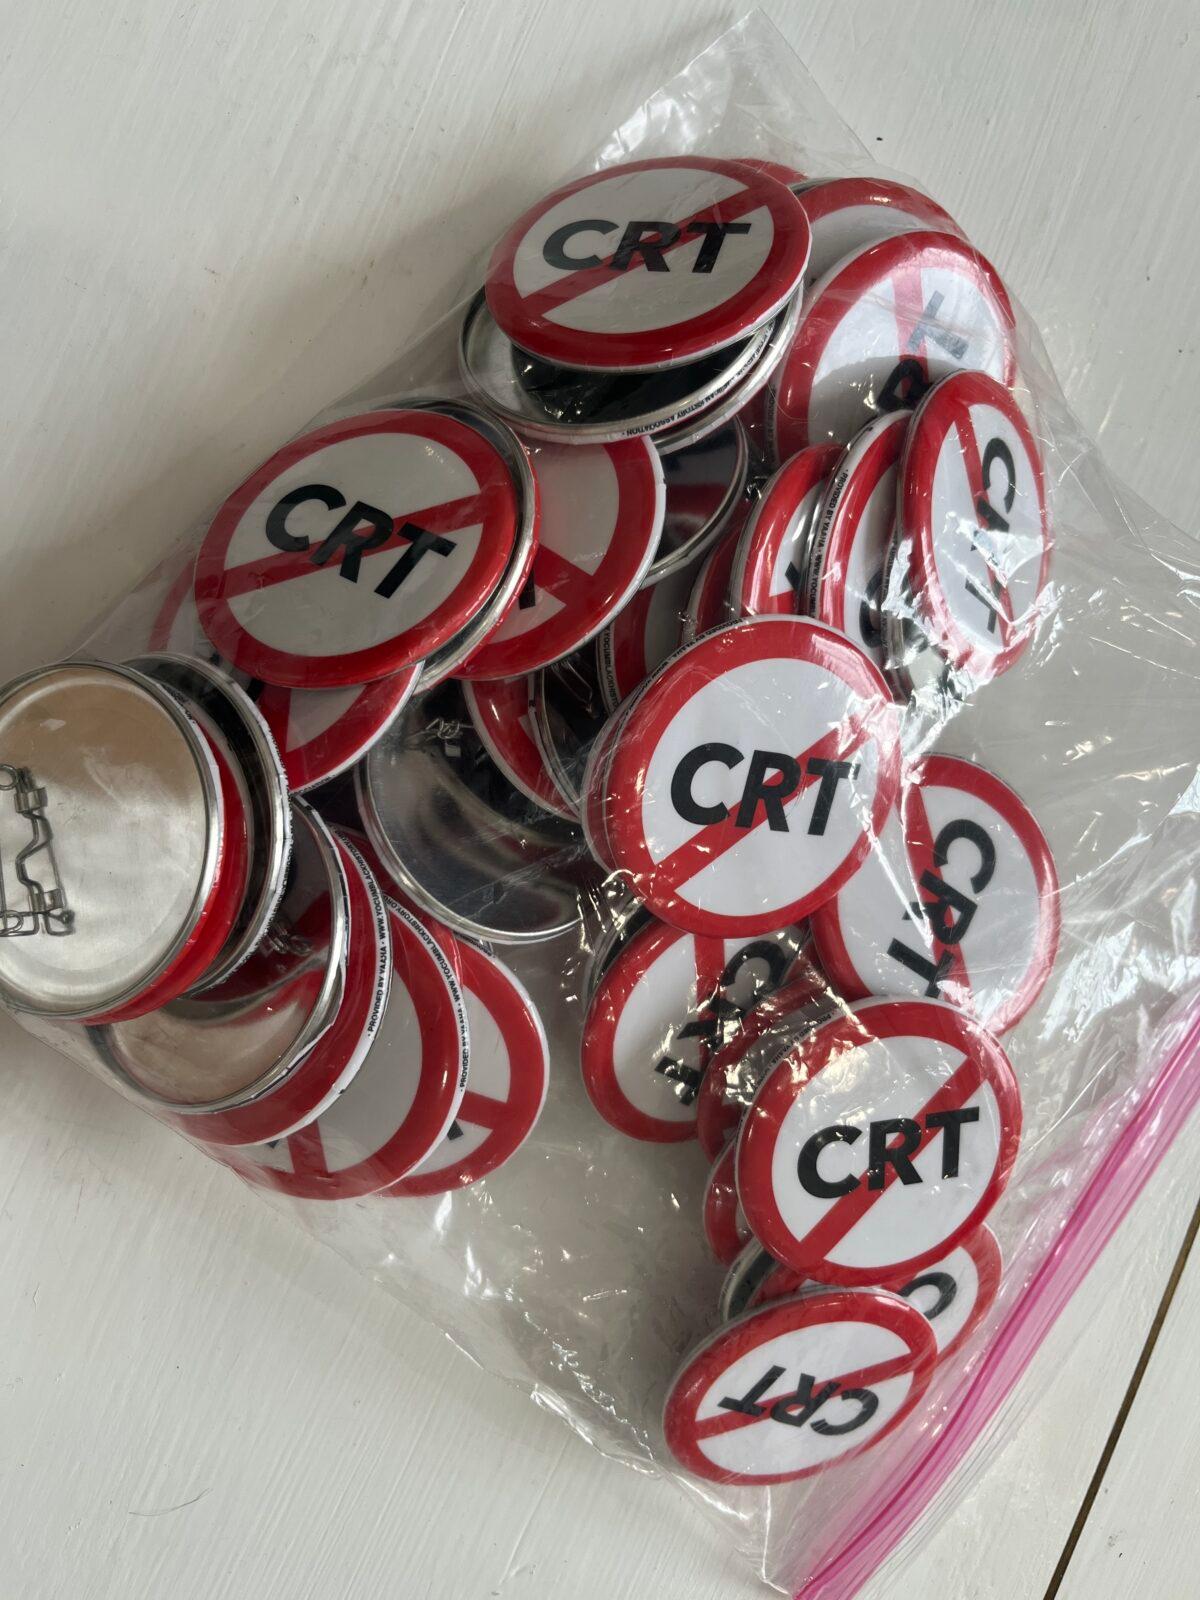  Parents concerned about critical race theory took home these buttons from a school board activist training on Jan. 19, 2022, in Sarasota, Fla. (Courtesy of Alexis Spiegelman)